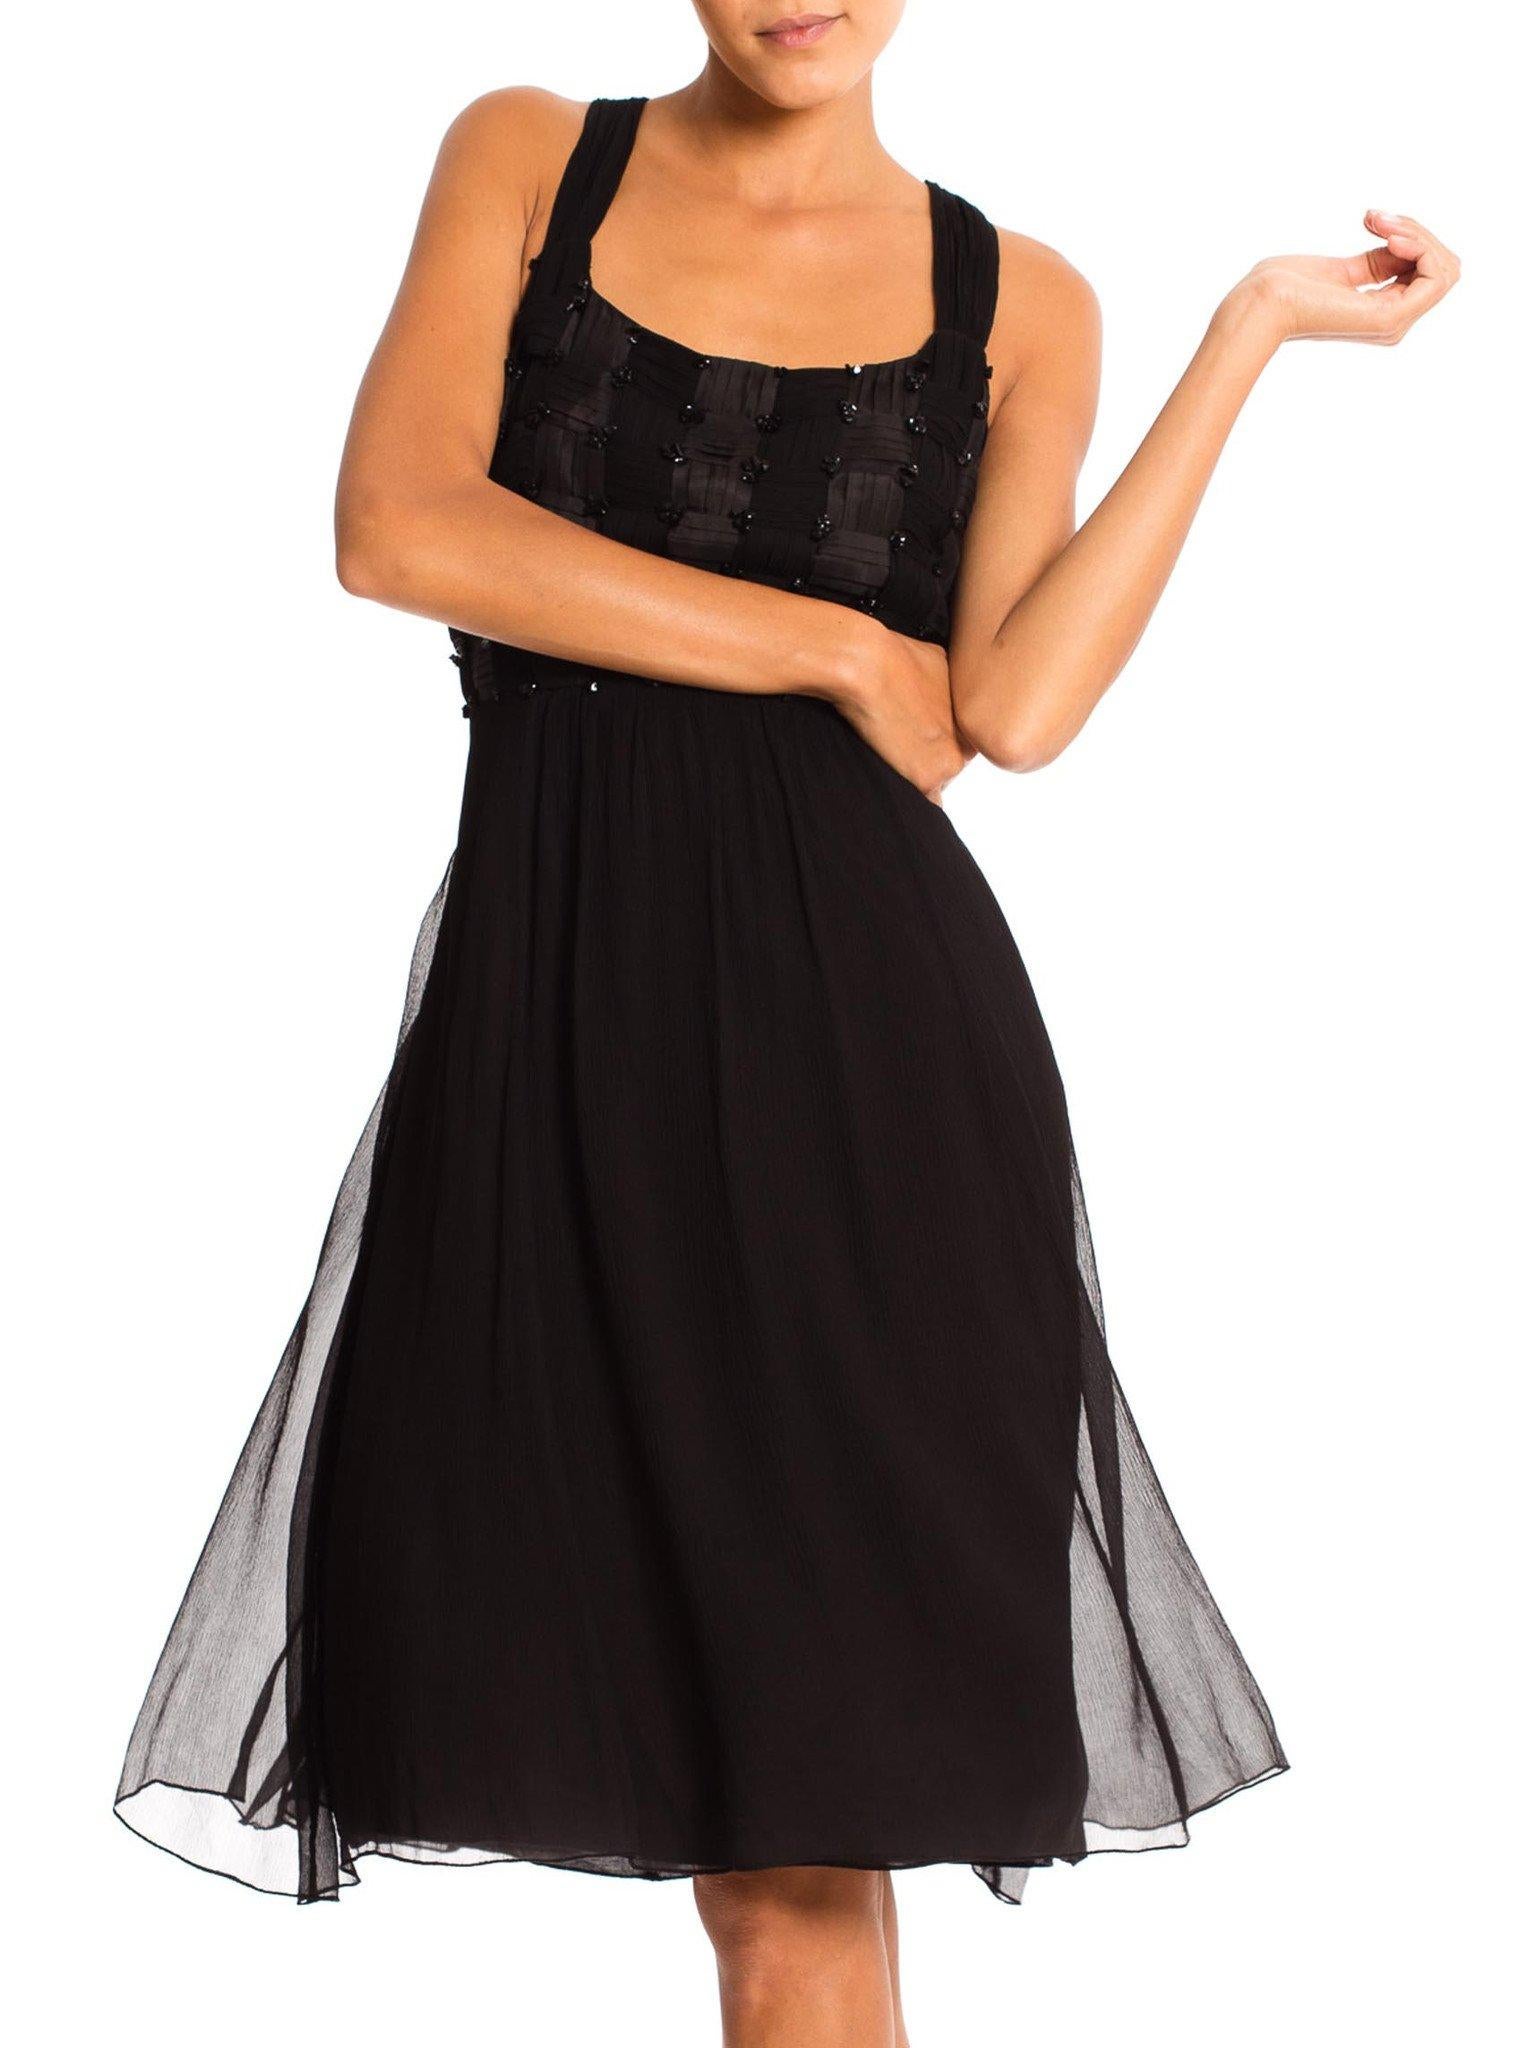 No label in this very high quality dress. The bodice is a work of art with the intricately pleated and woven textile. Lined in rayon with an attached silk sash to adjust the waist.  1980'S Black Silk Mousseline & Satin Basket-Weave Bodice Cocktail